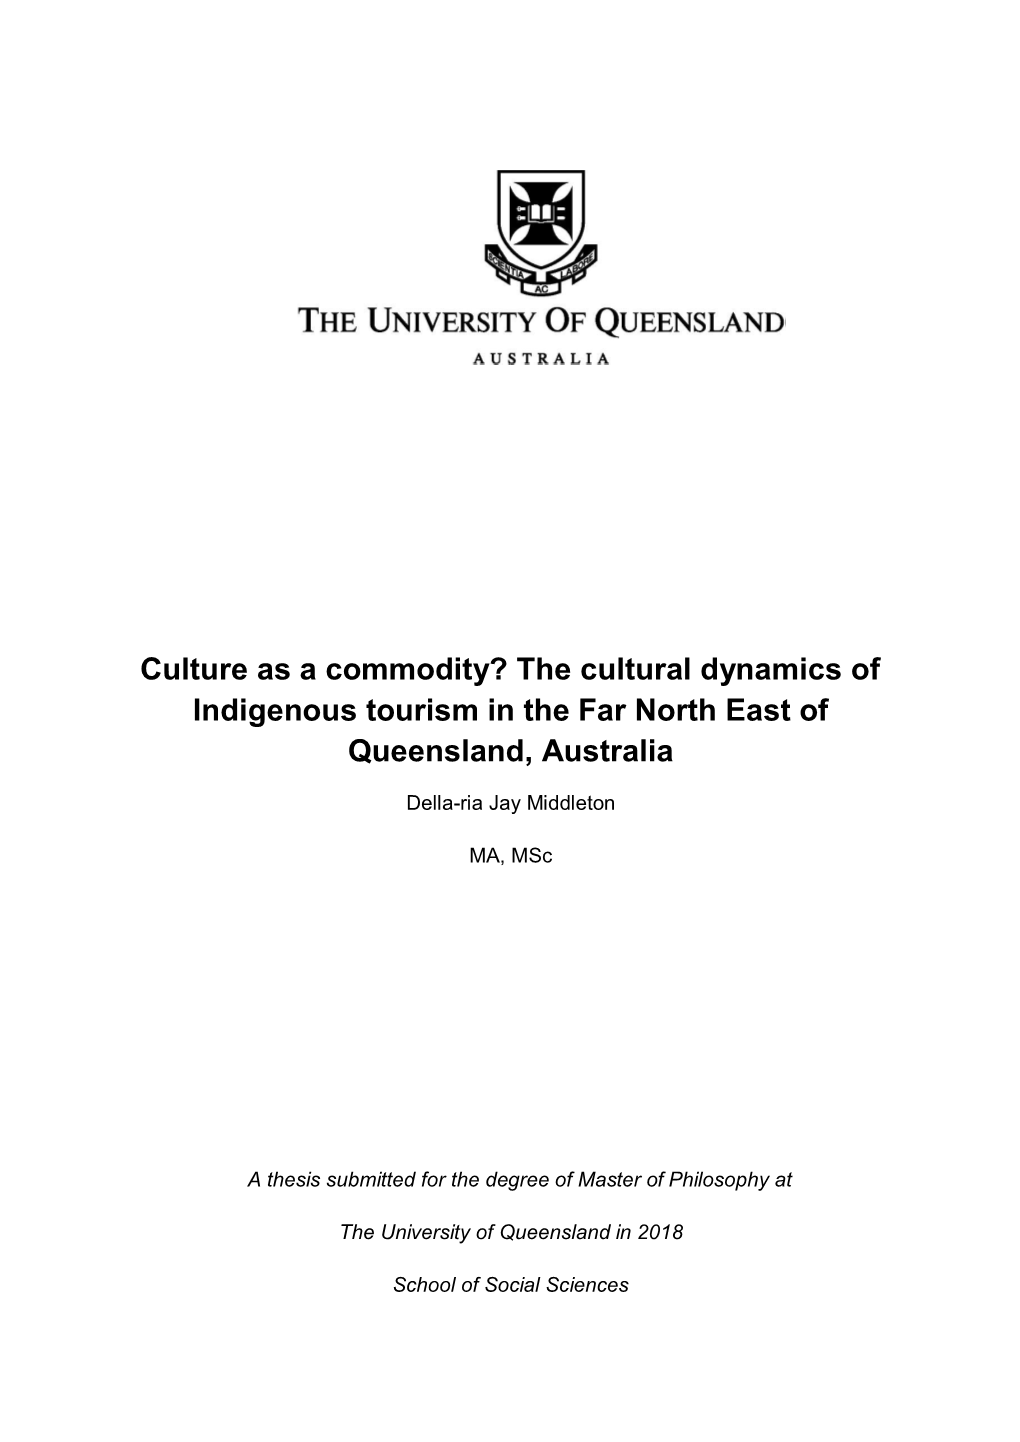 Culture As a Commodity? the Cultural Dynamics of Indigenous Tourism in the Far North East of Queensland, Australia